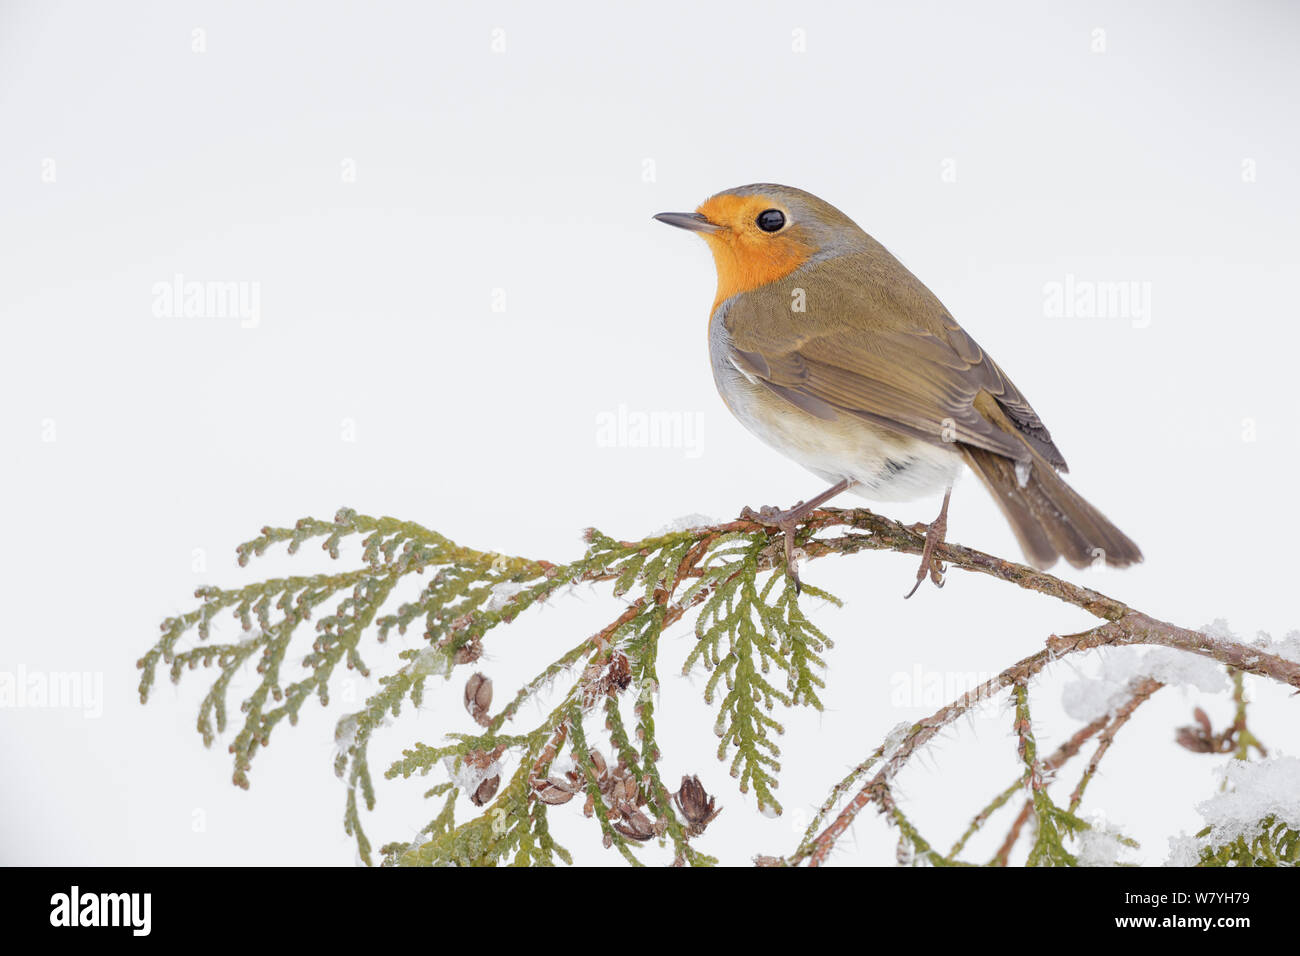 European robin (Erithacus rubecula) perched on snowy branch, Southern Norway. January. Stock Photo